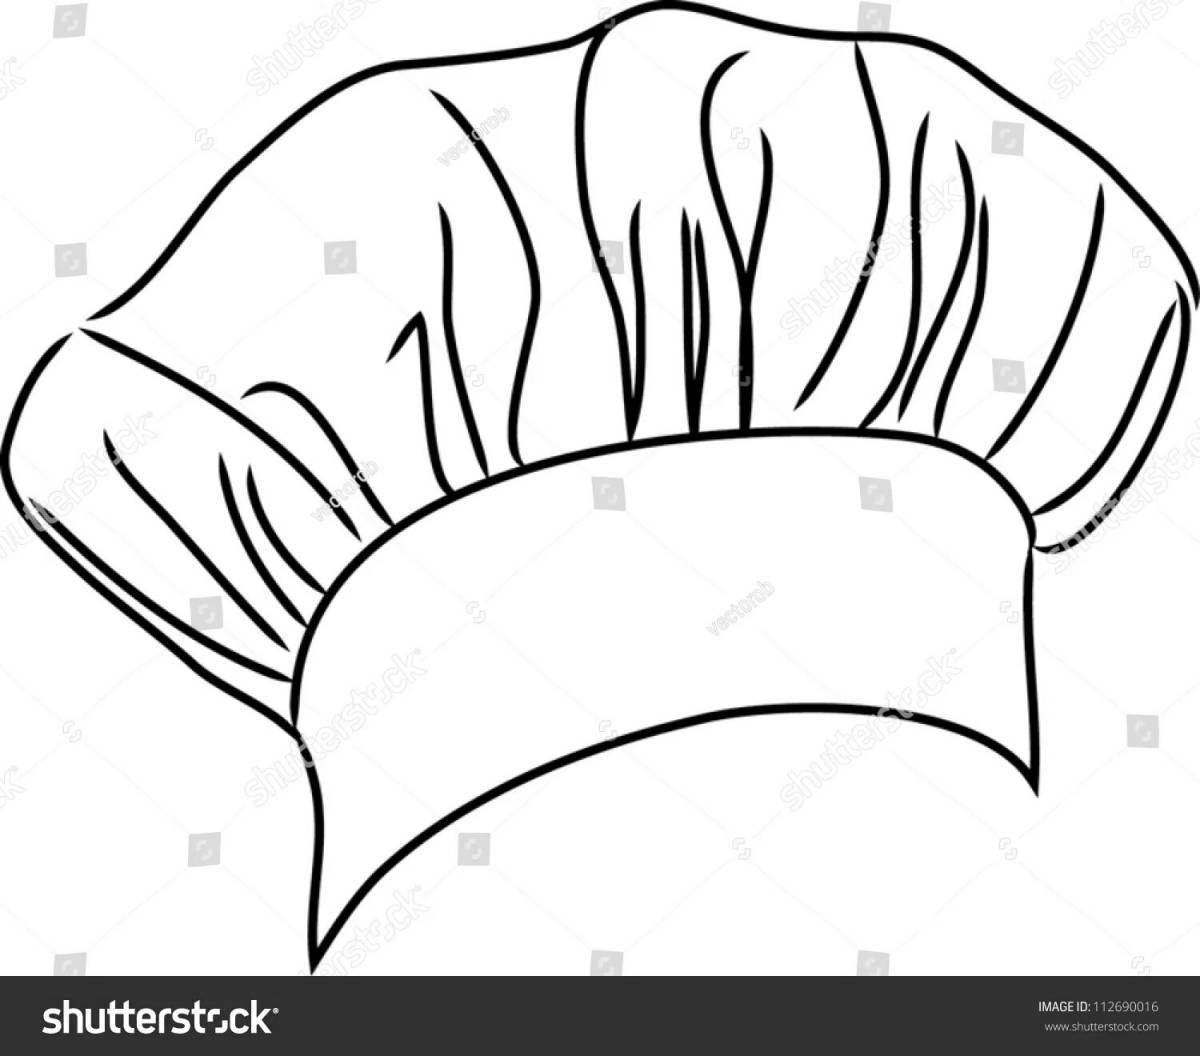 Coloring bright chef's hat